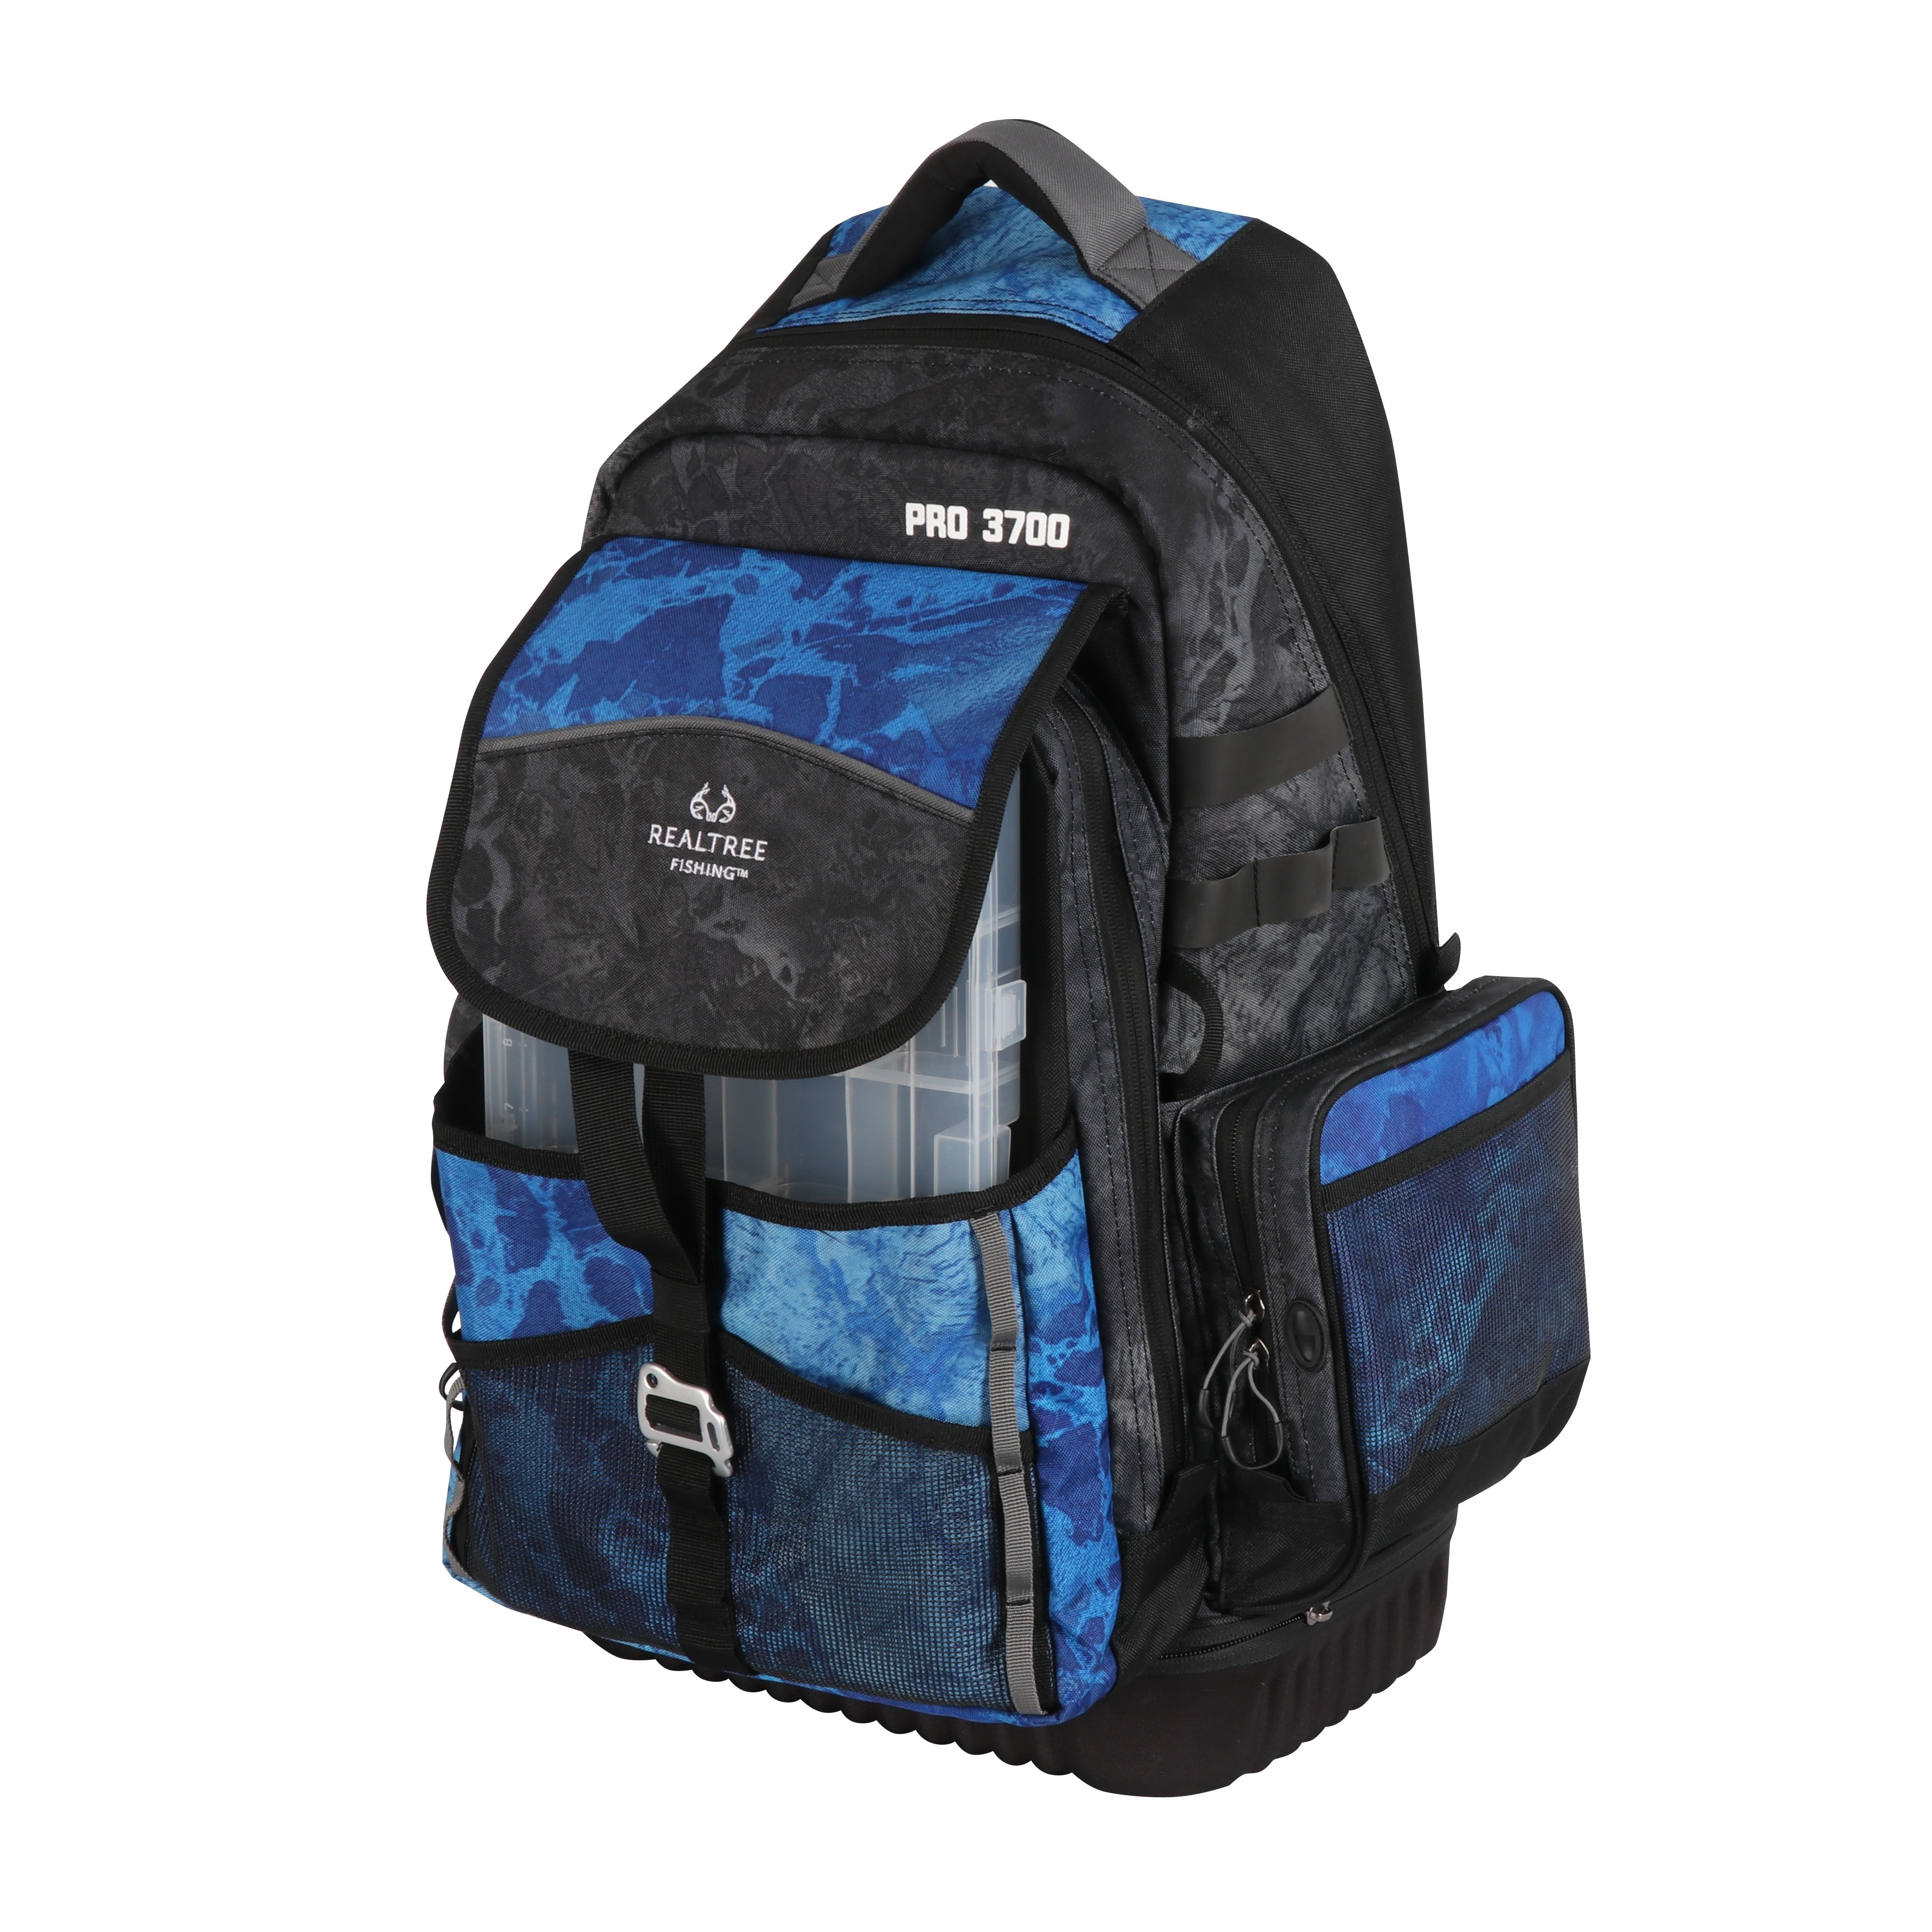 Realtree 3700 Fishing Tackle Pro Backpack w/ 5 Utility Boxes